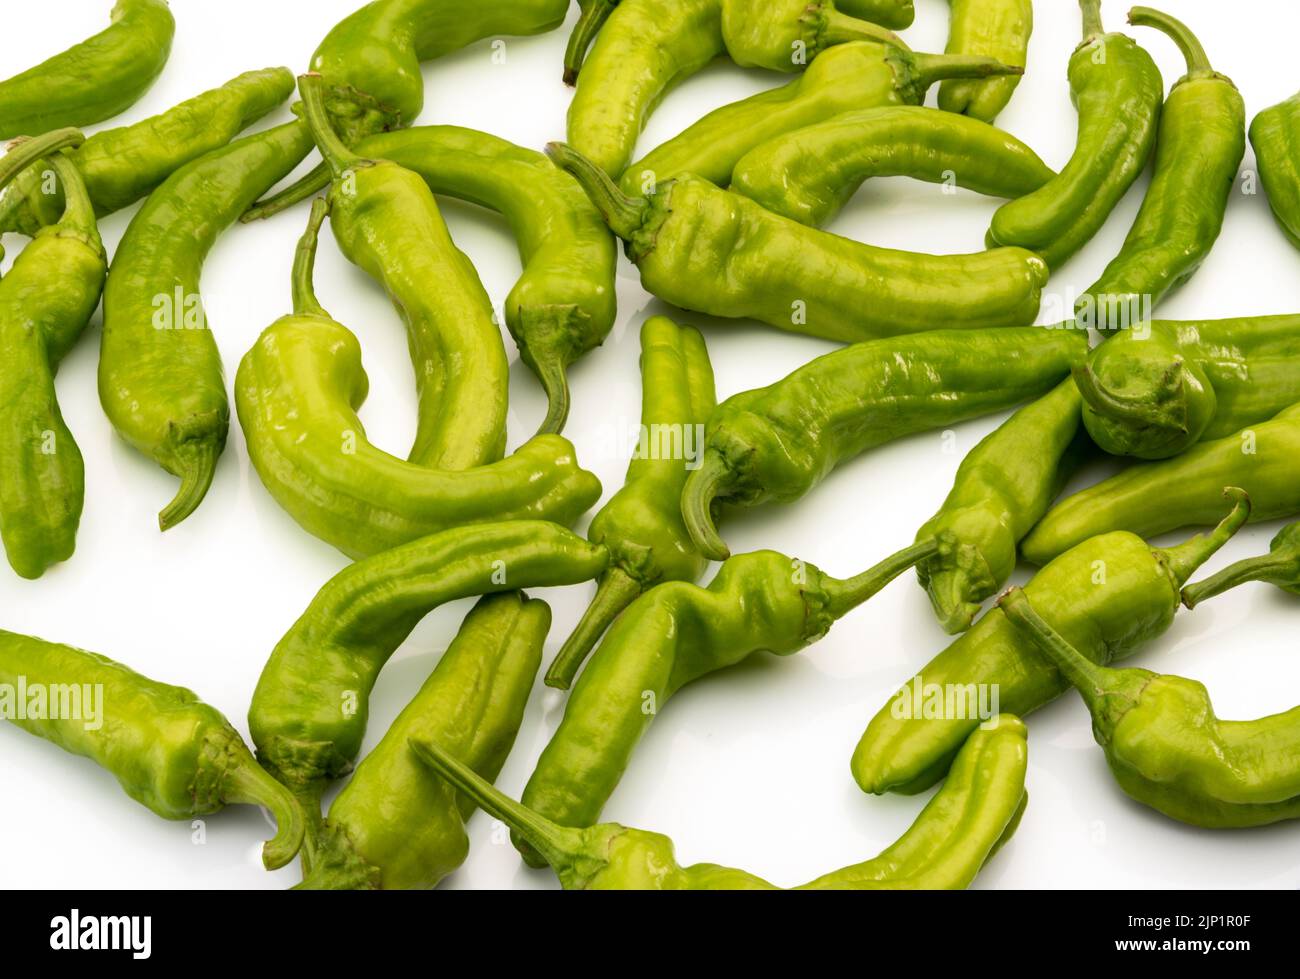 Friggitelli, Tuscan or Greek mild peppers, called also Pepperoncini in isolated on yellow background in top view Stock Photo